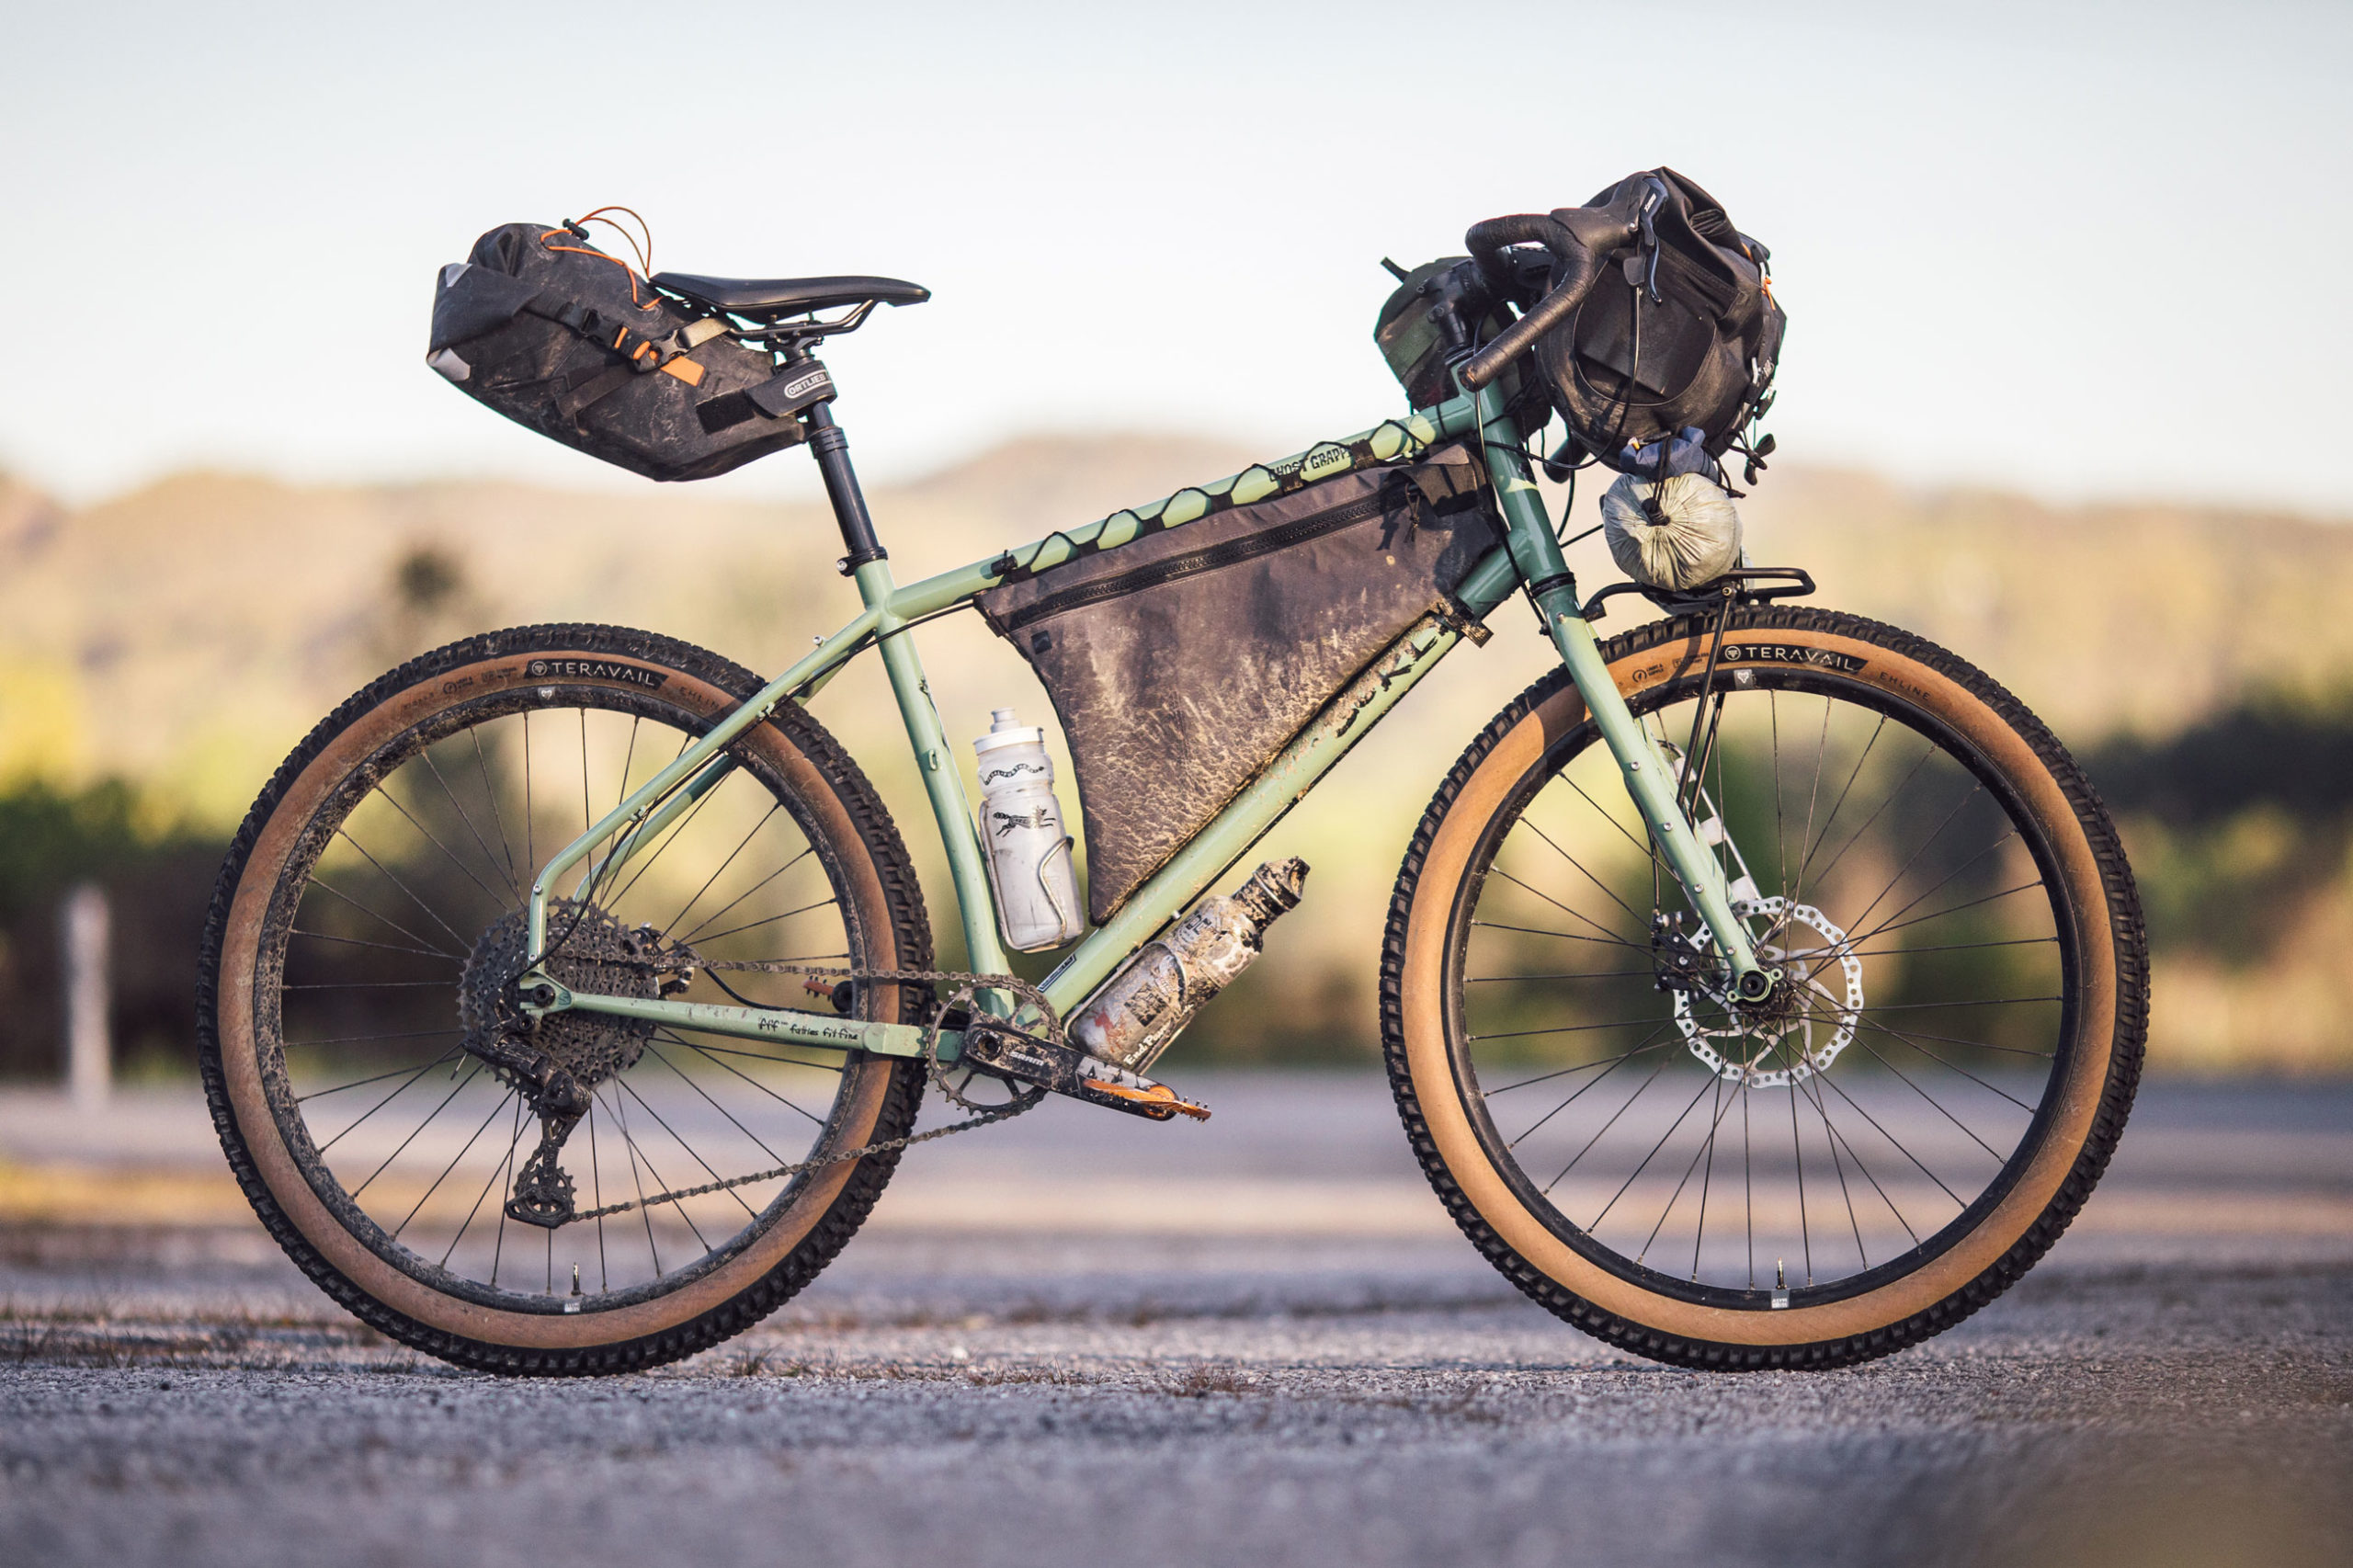 Surly Ghost Grappler Review - BIKEPACKING.com